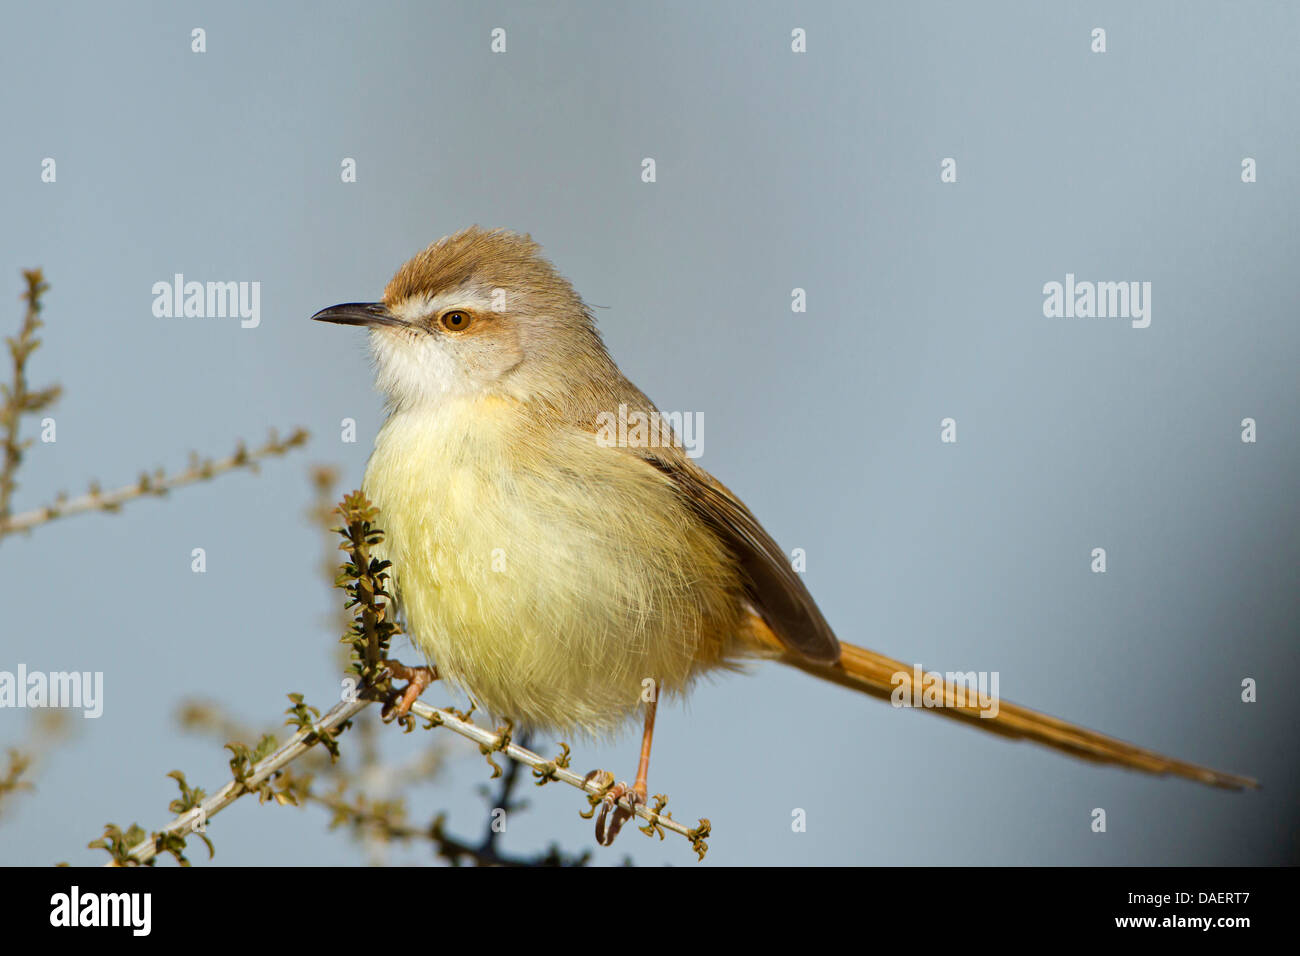 Black-chested prinia (Prinia flavicans), sitting on a twig, South Africa, Kgalagadi Transfrontier National Park, Northern Cape Stock Photo